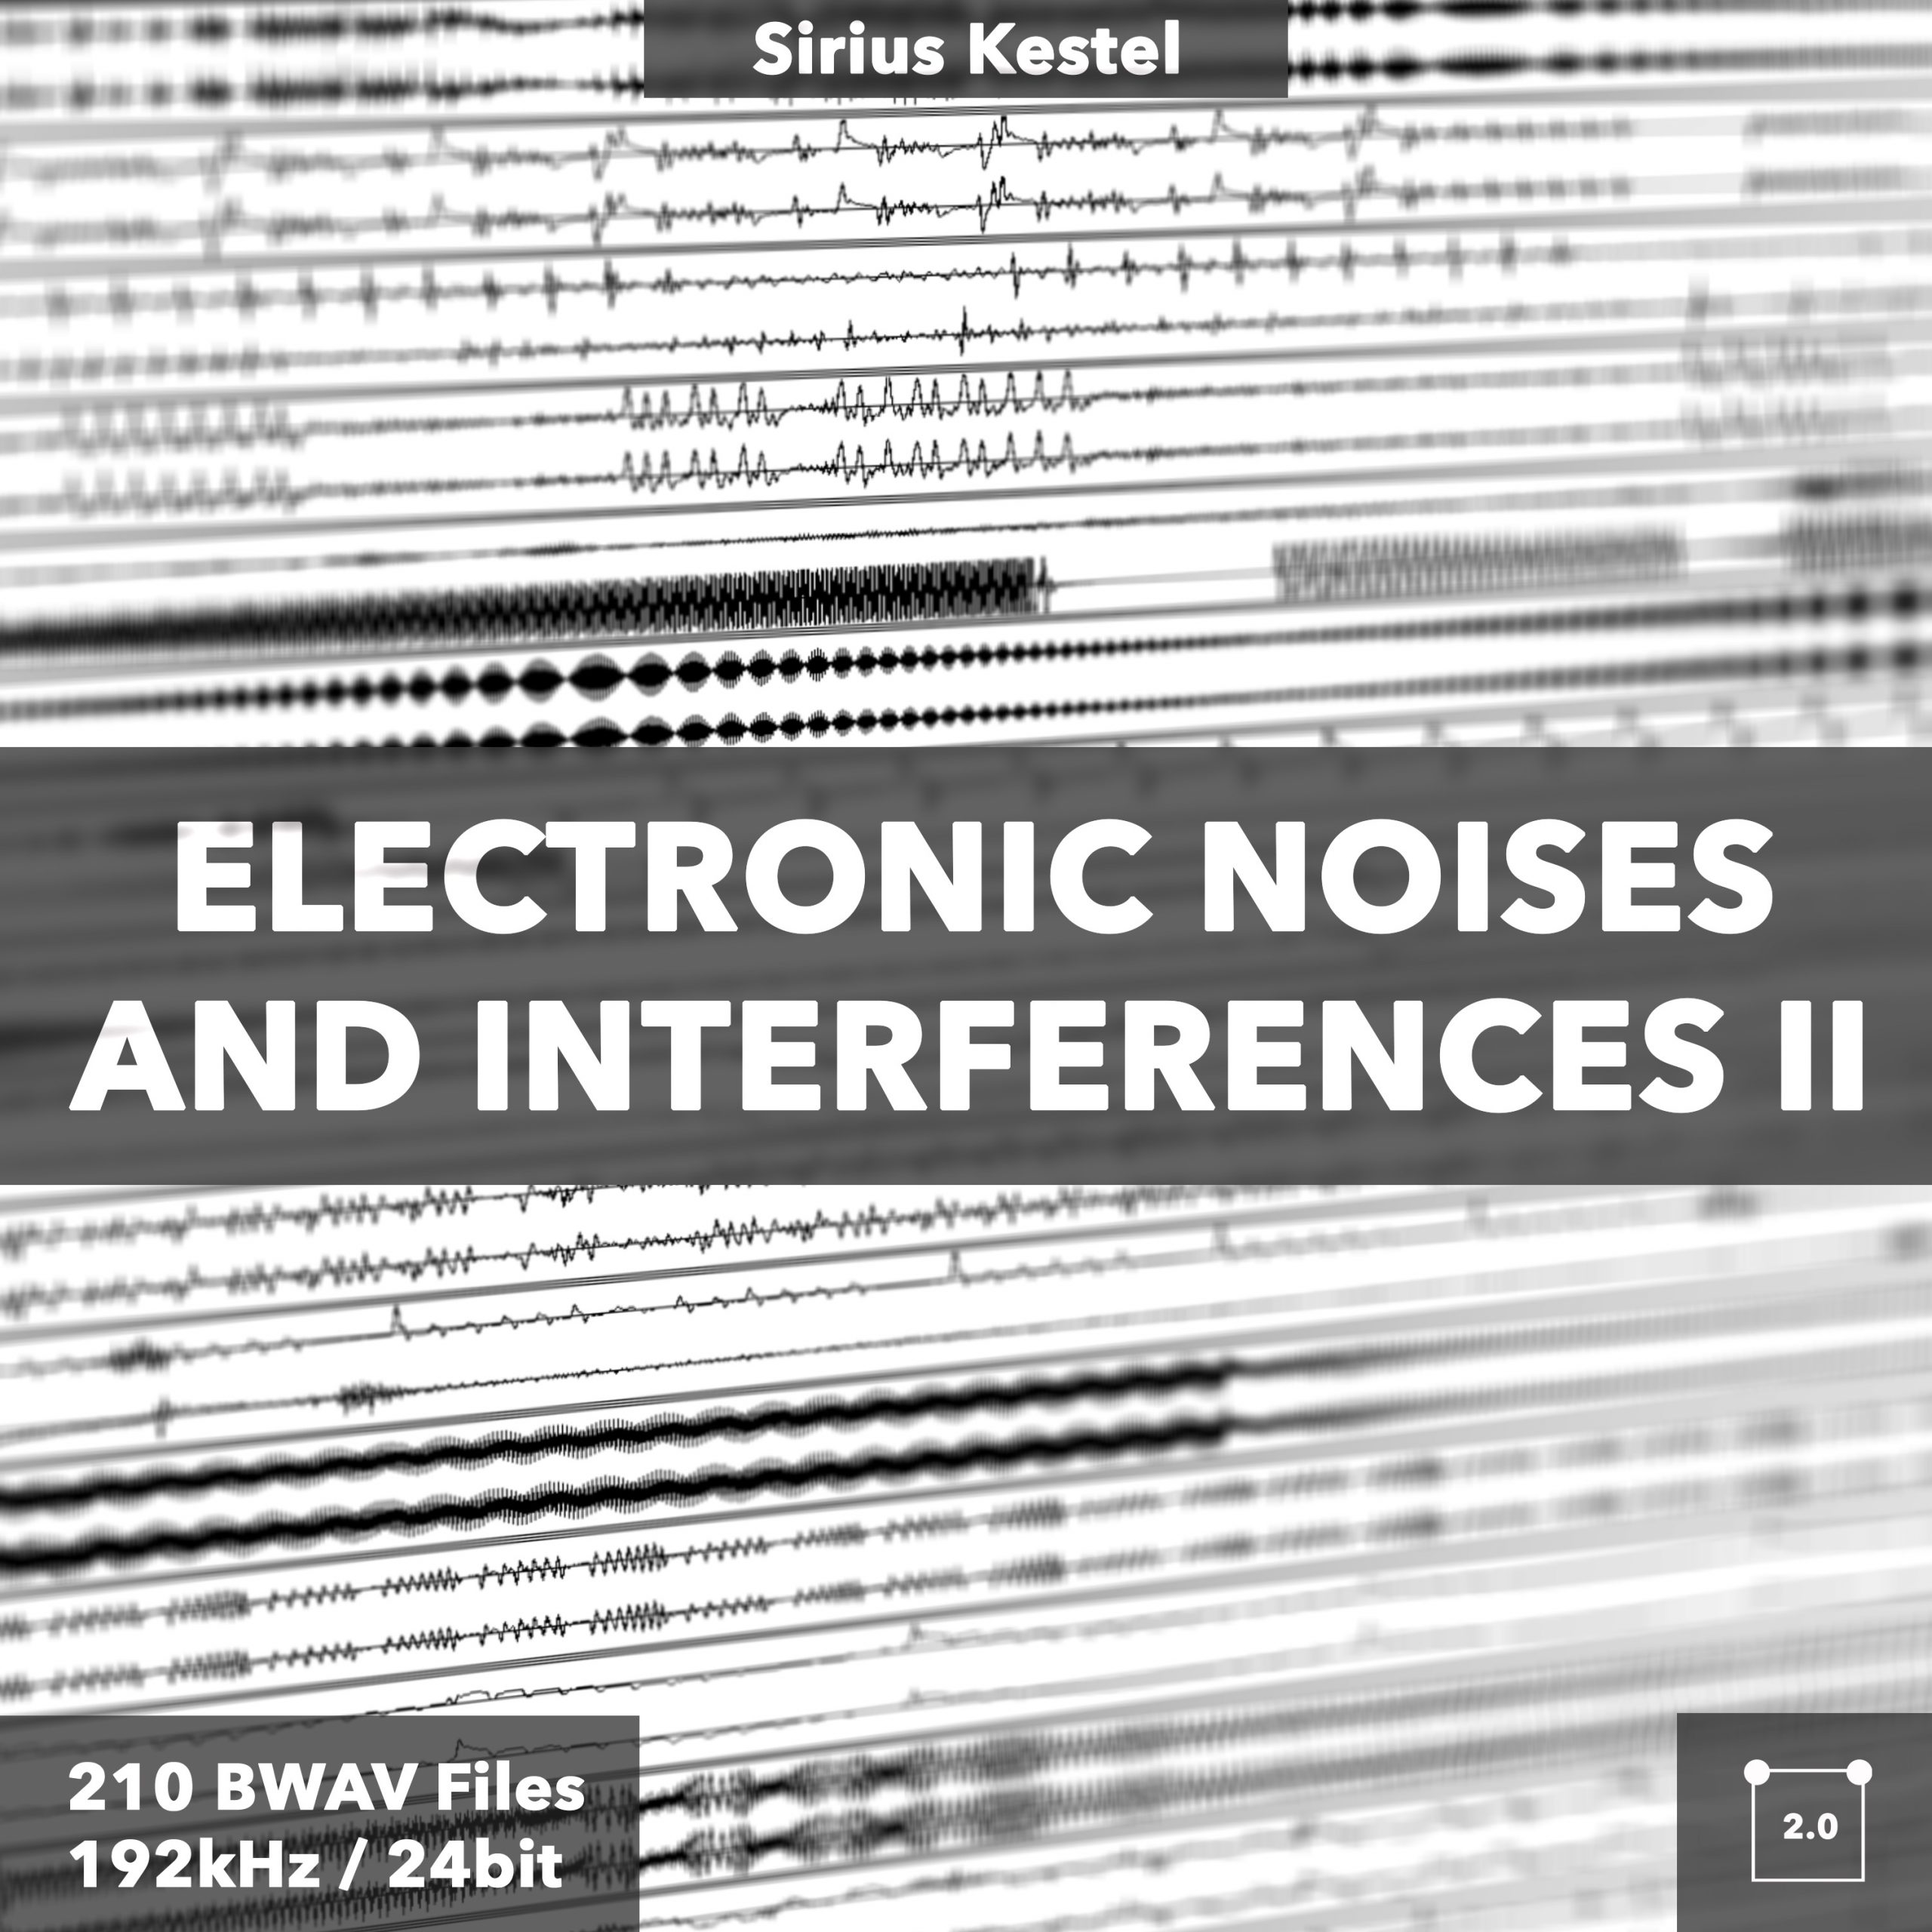 Electronic noises and interferences II - Cover